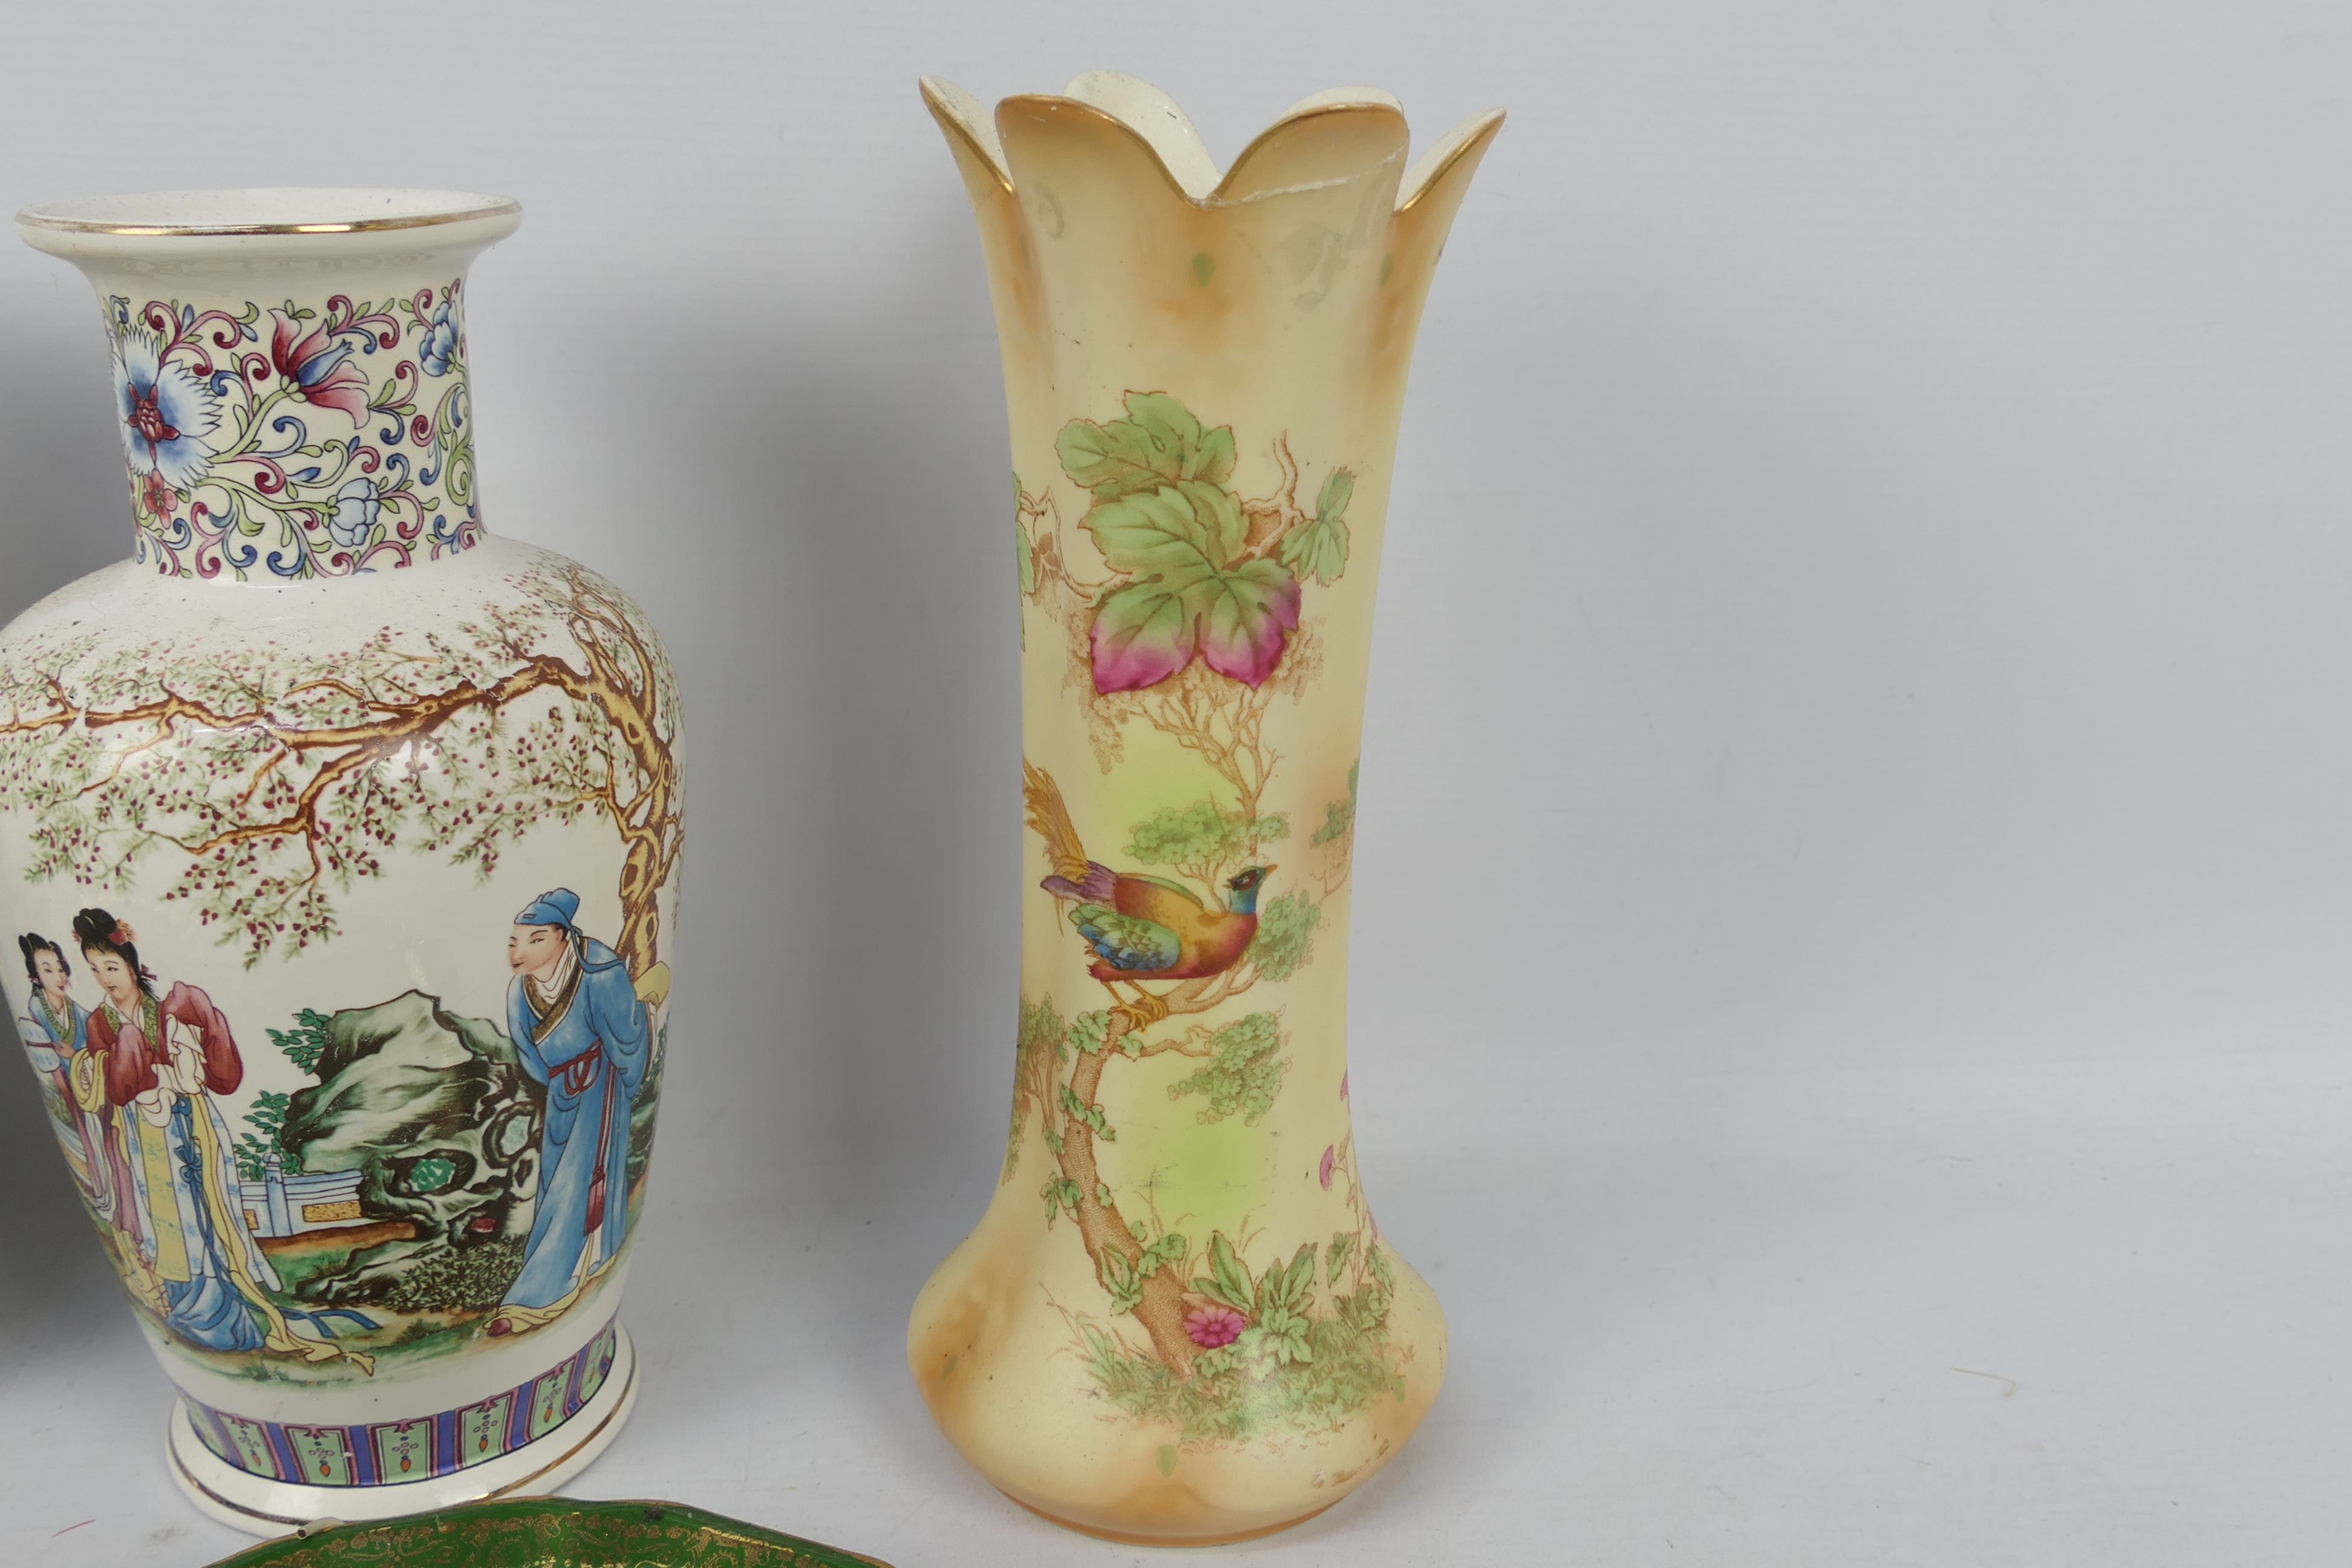 Three Chinese vases, largest approximately 30 cm (h), a Crown Ducal vase and other. - Image 7 of 9